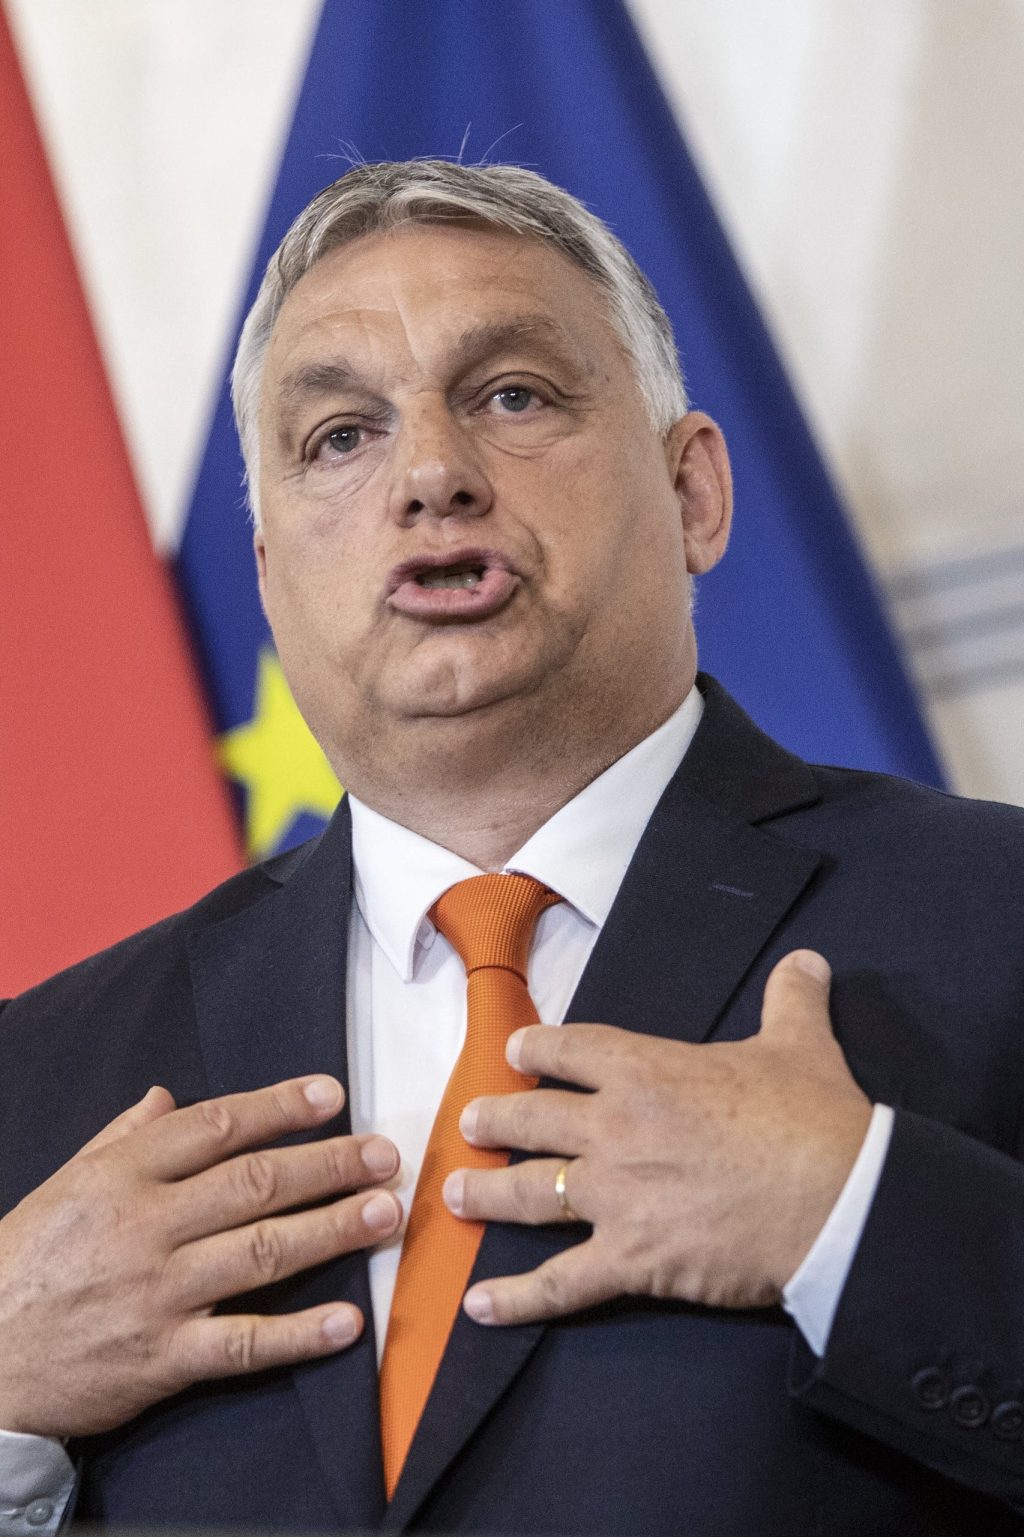 US lashes out at Hungarian PM Orbán for racism